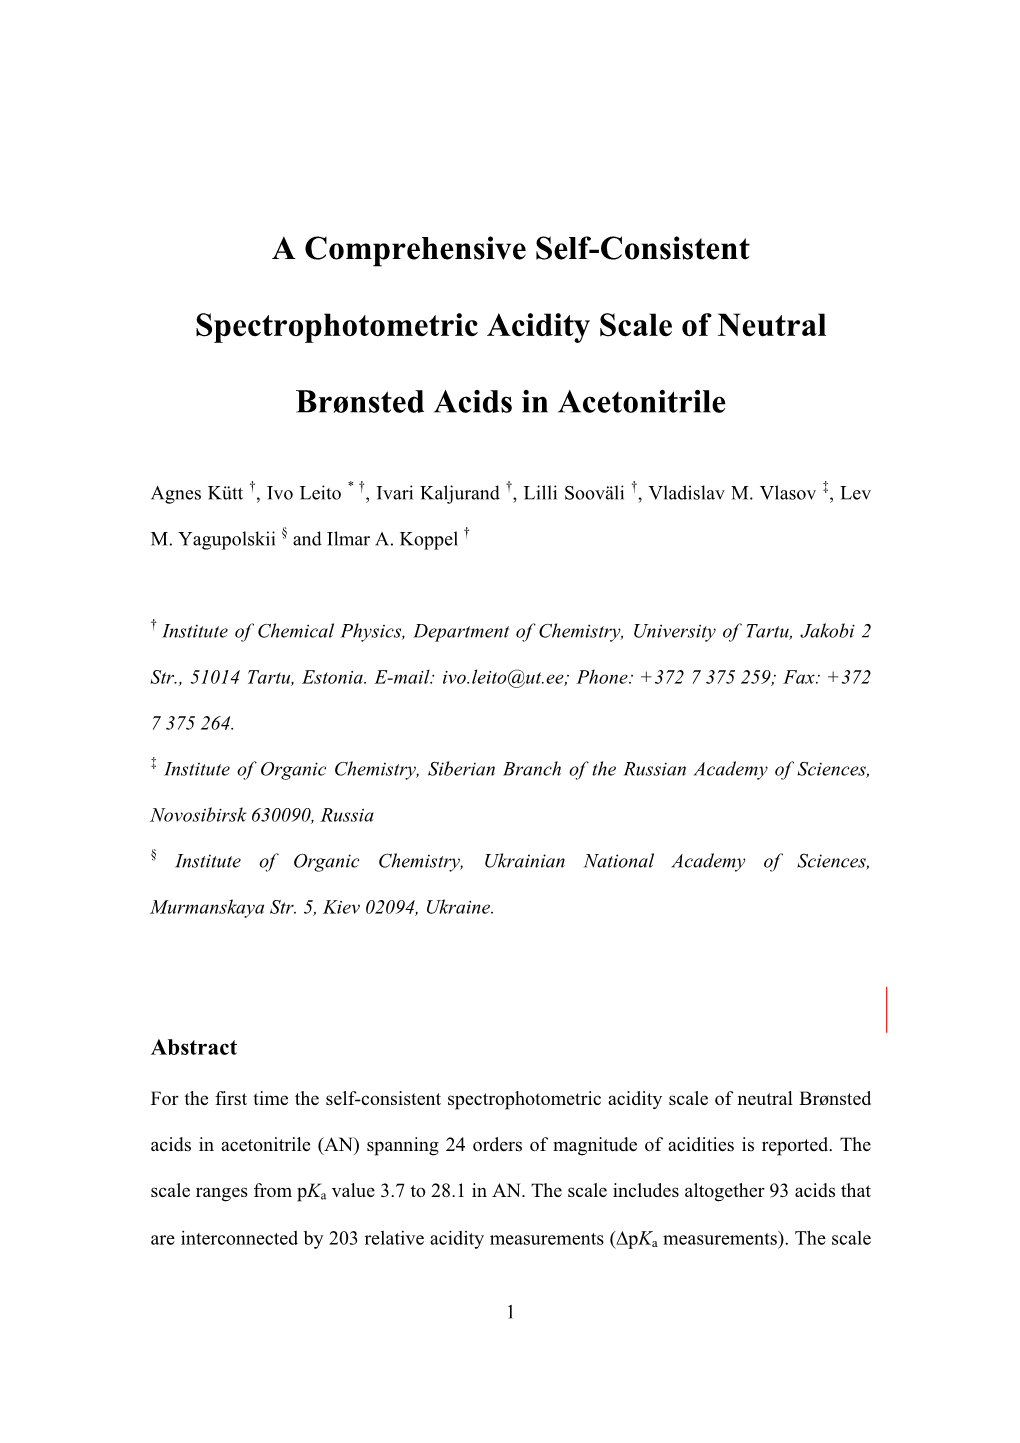 A Comprehensive Self-Consistent Spectrophotometric Acidity Scale Of